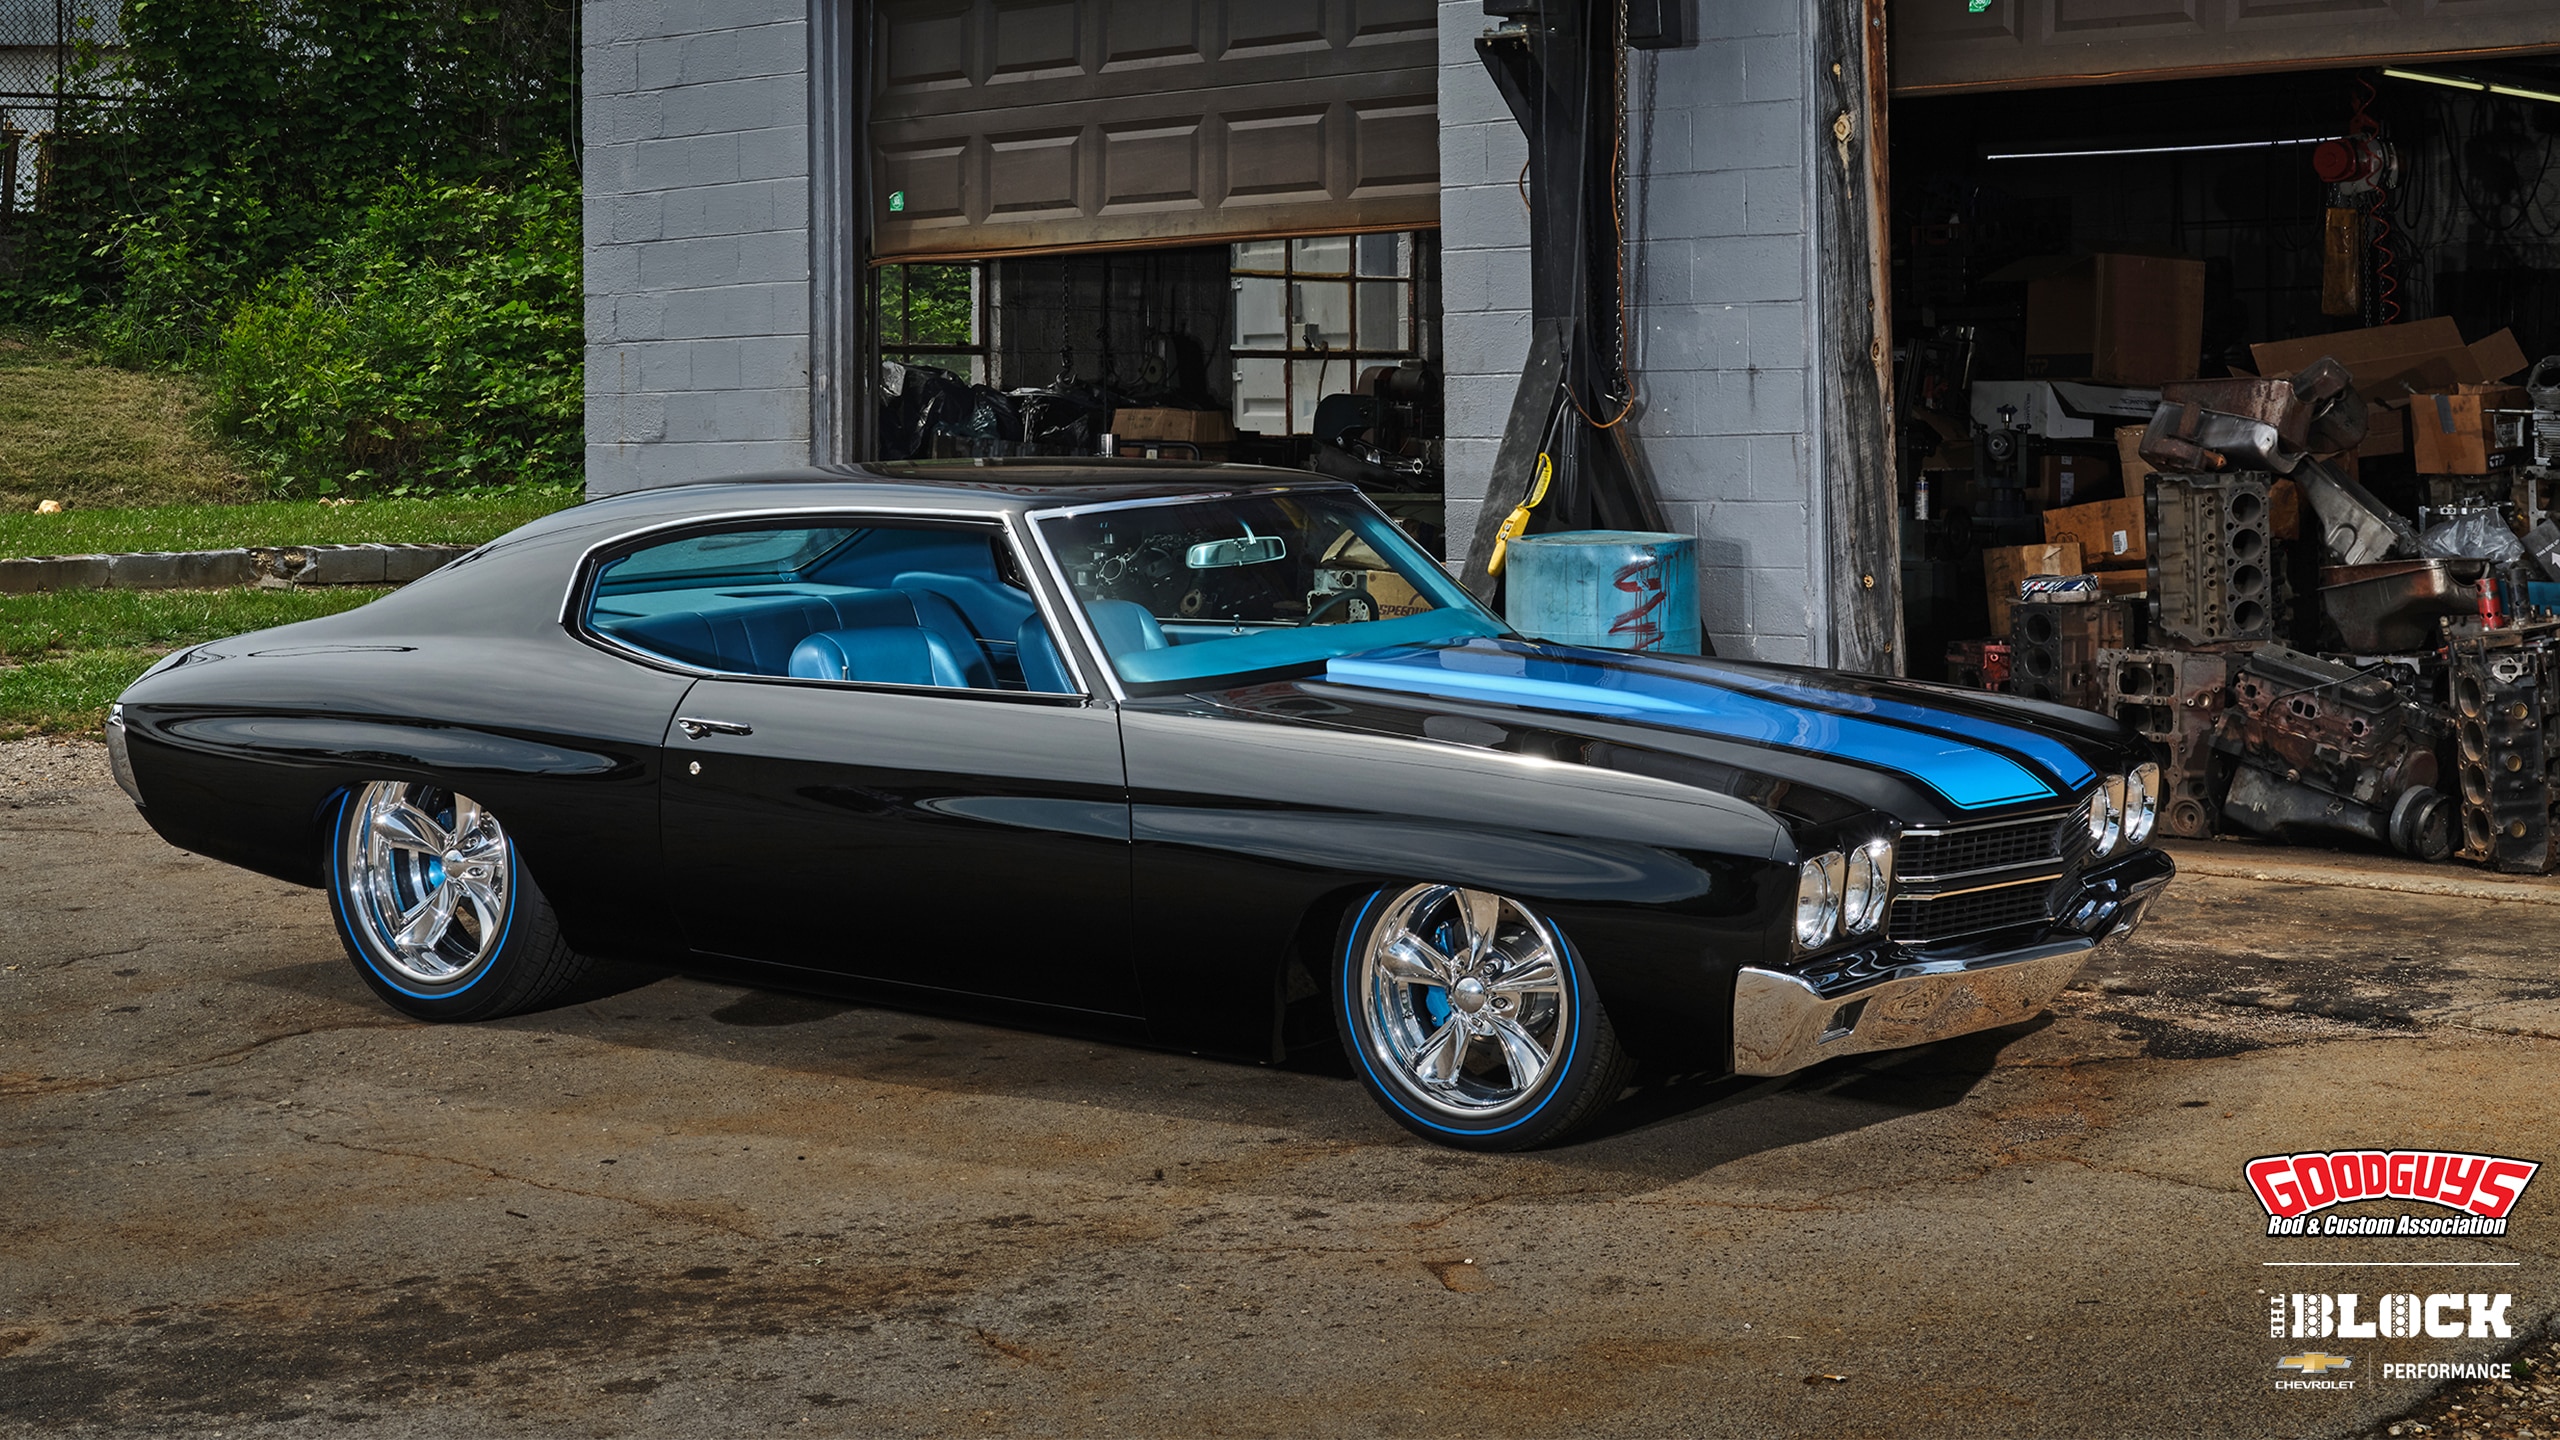 Wallpaper Wednesday Chevelle With Lsx Power